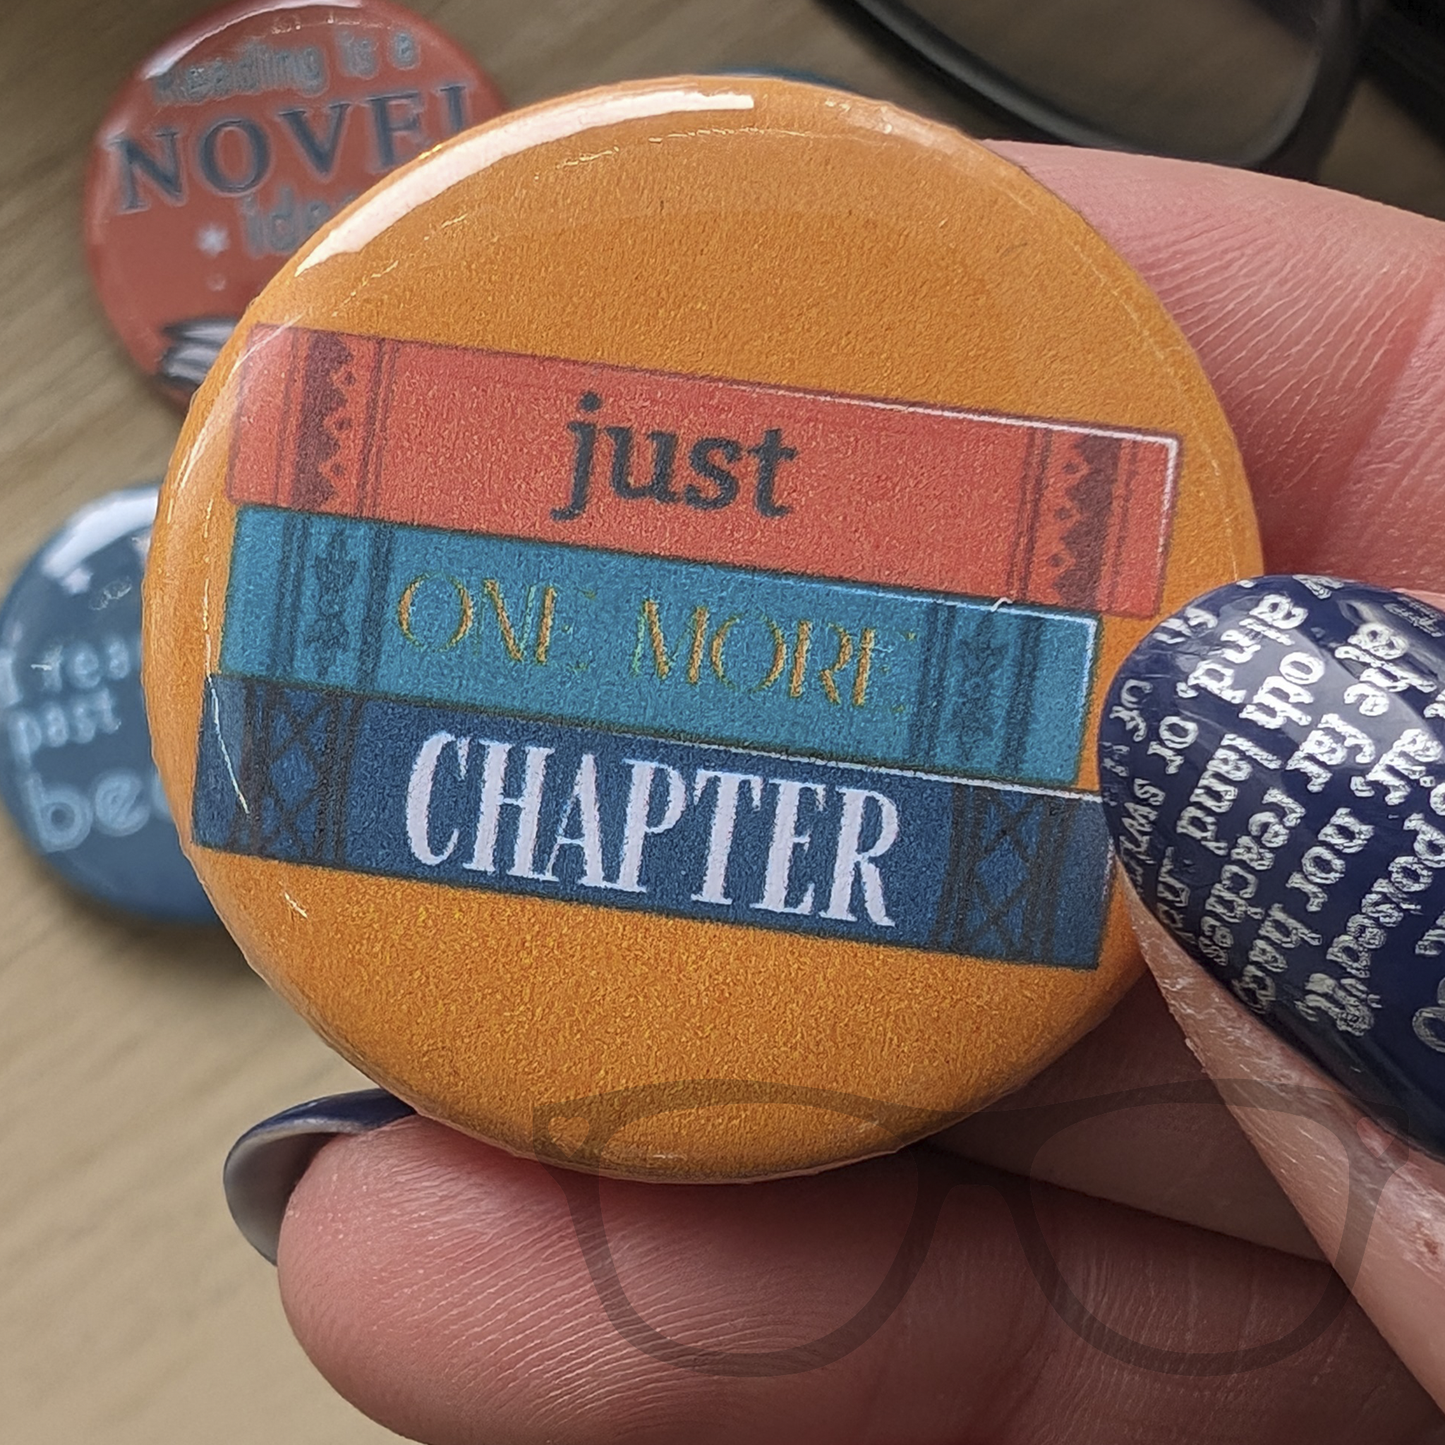 A yellow 38mm badge as part of a set "Just one more chapter"